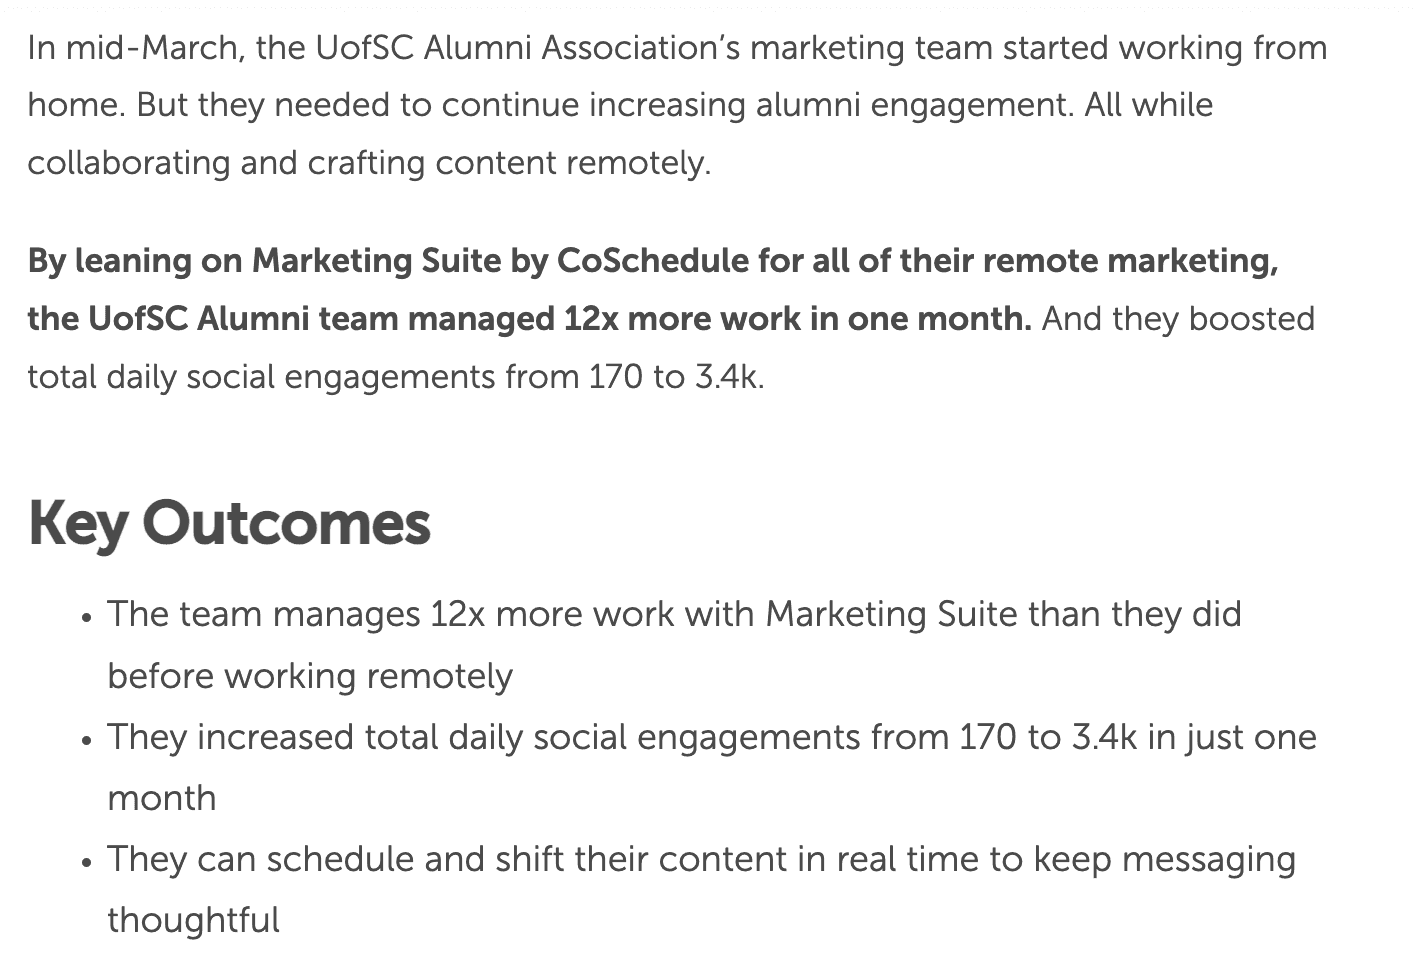 UofSC alumni associations's marketing team managed 12x more work with marketing suite